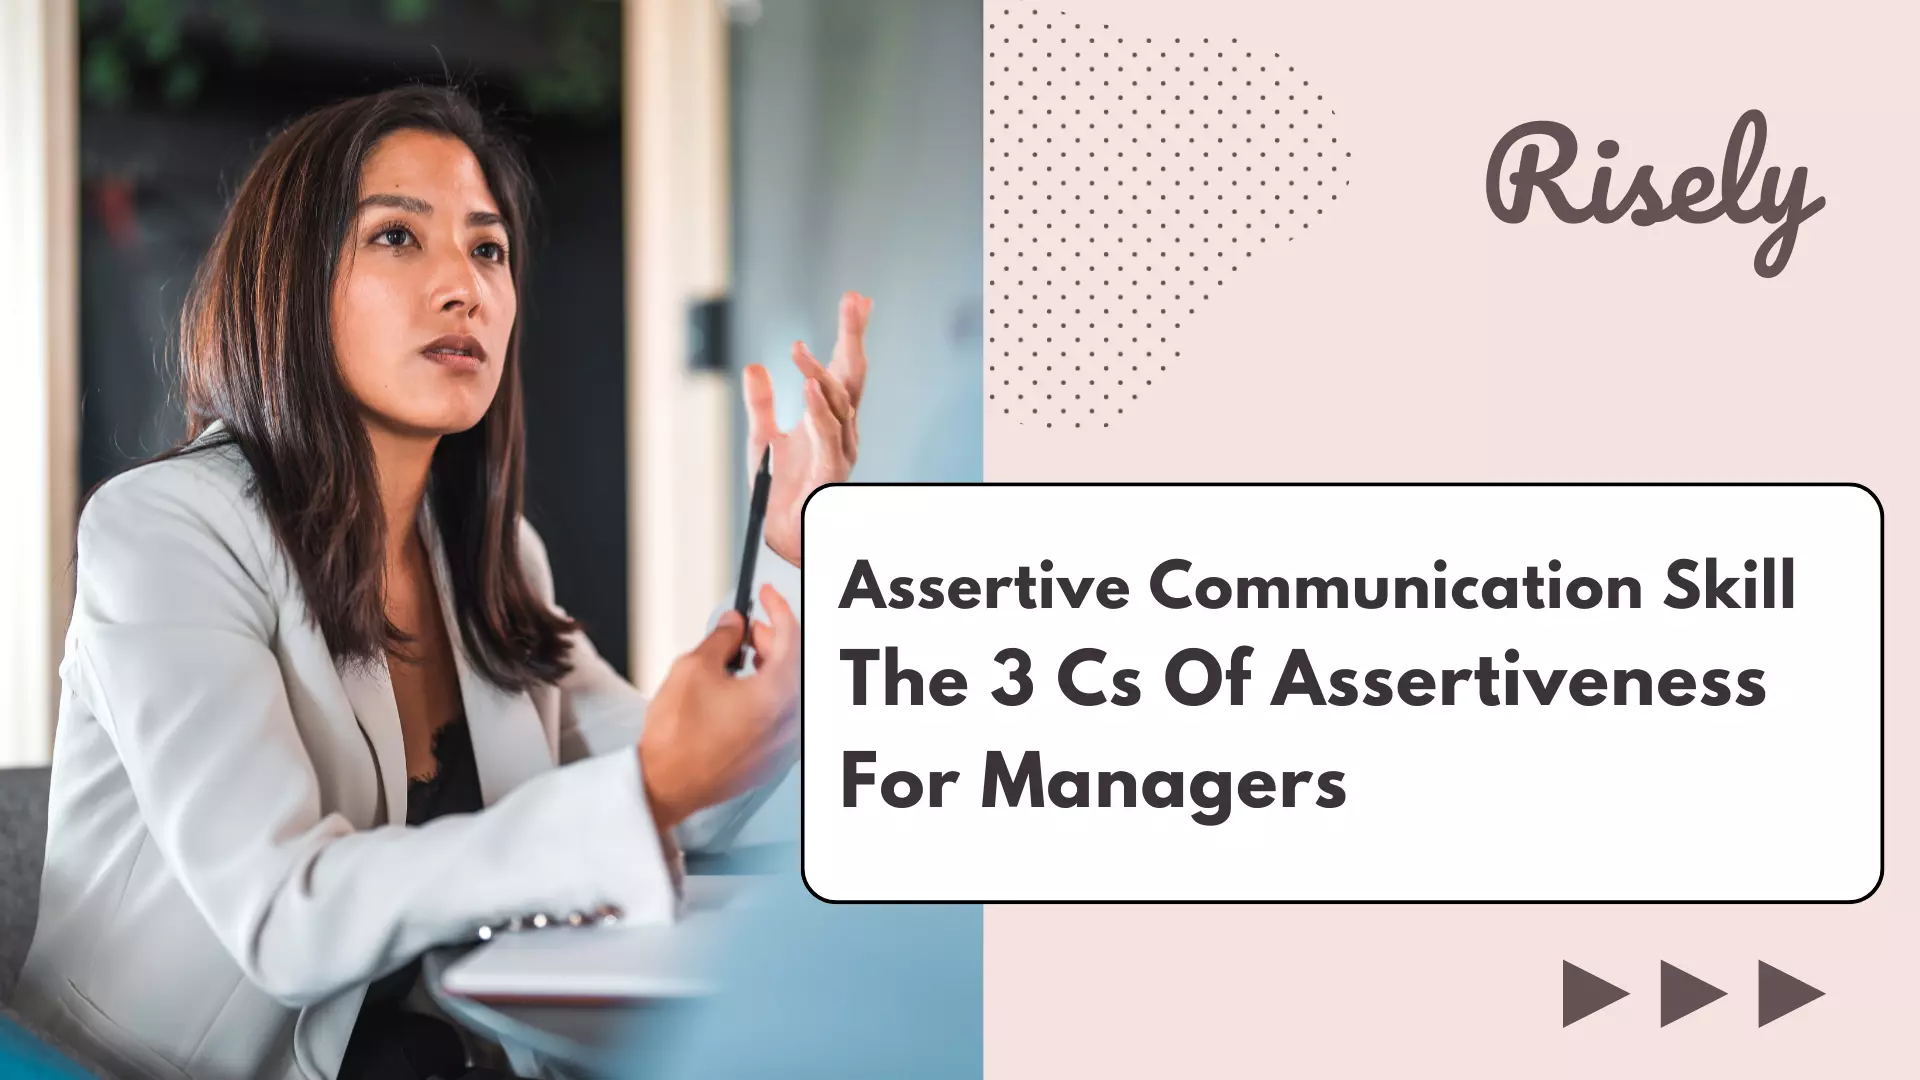 Assertive Communication Skill: The 3 Cs Of Assertiveness For Managers